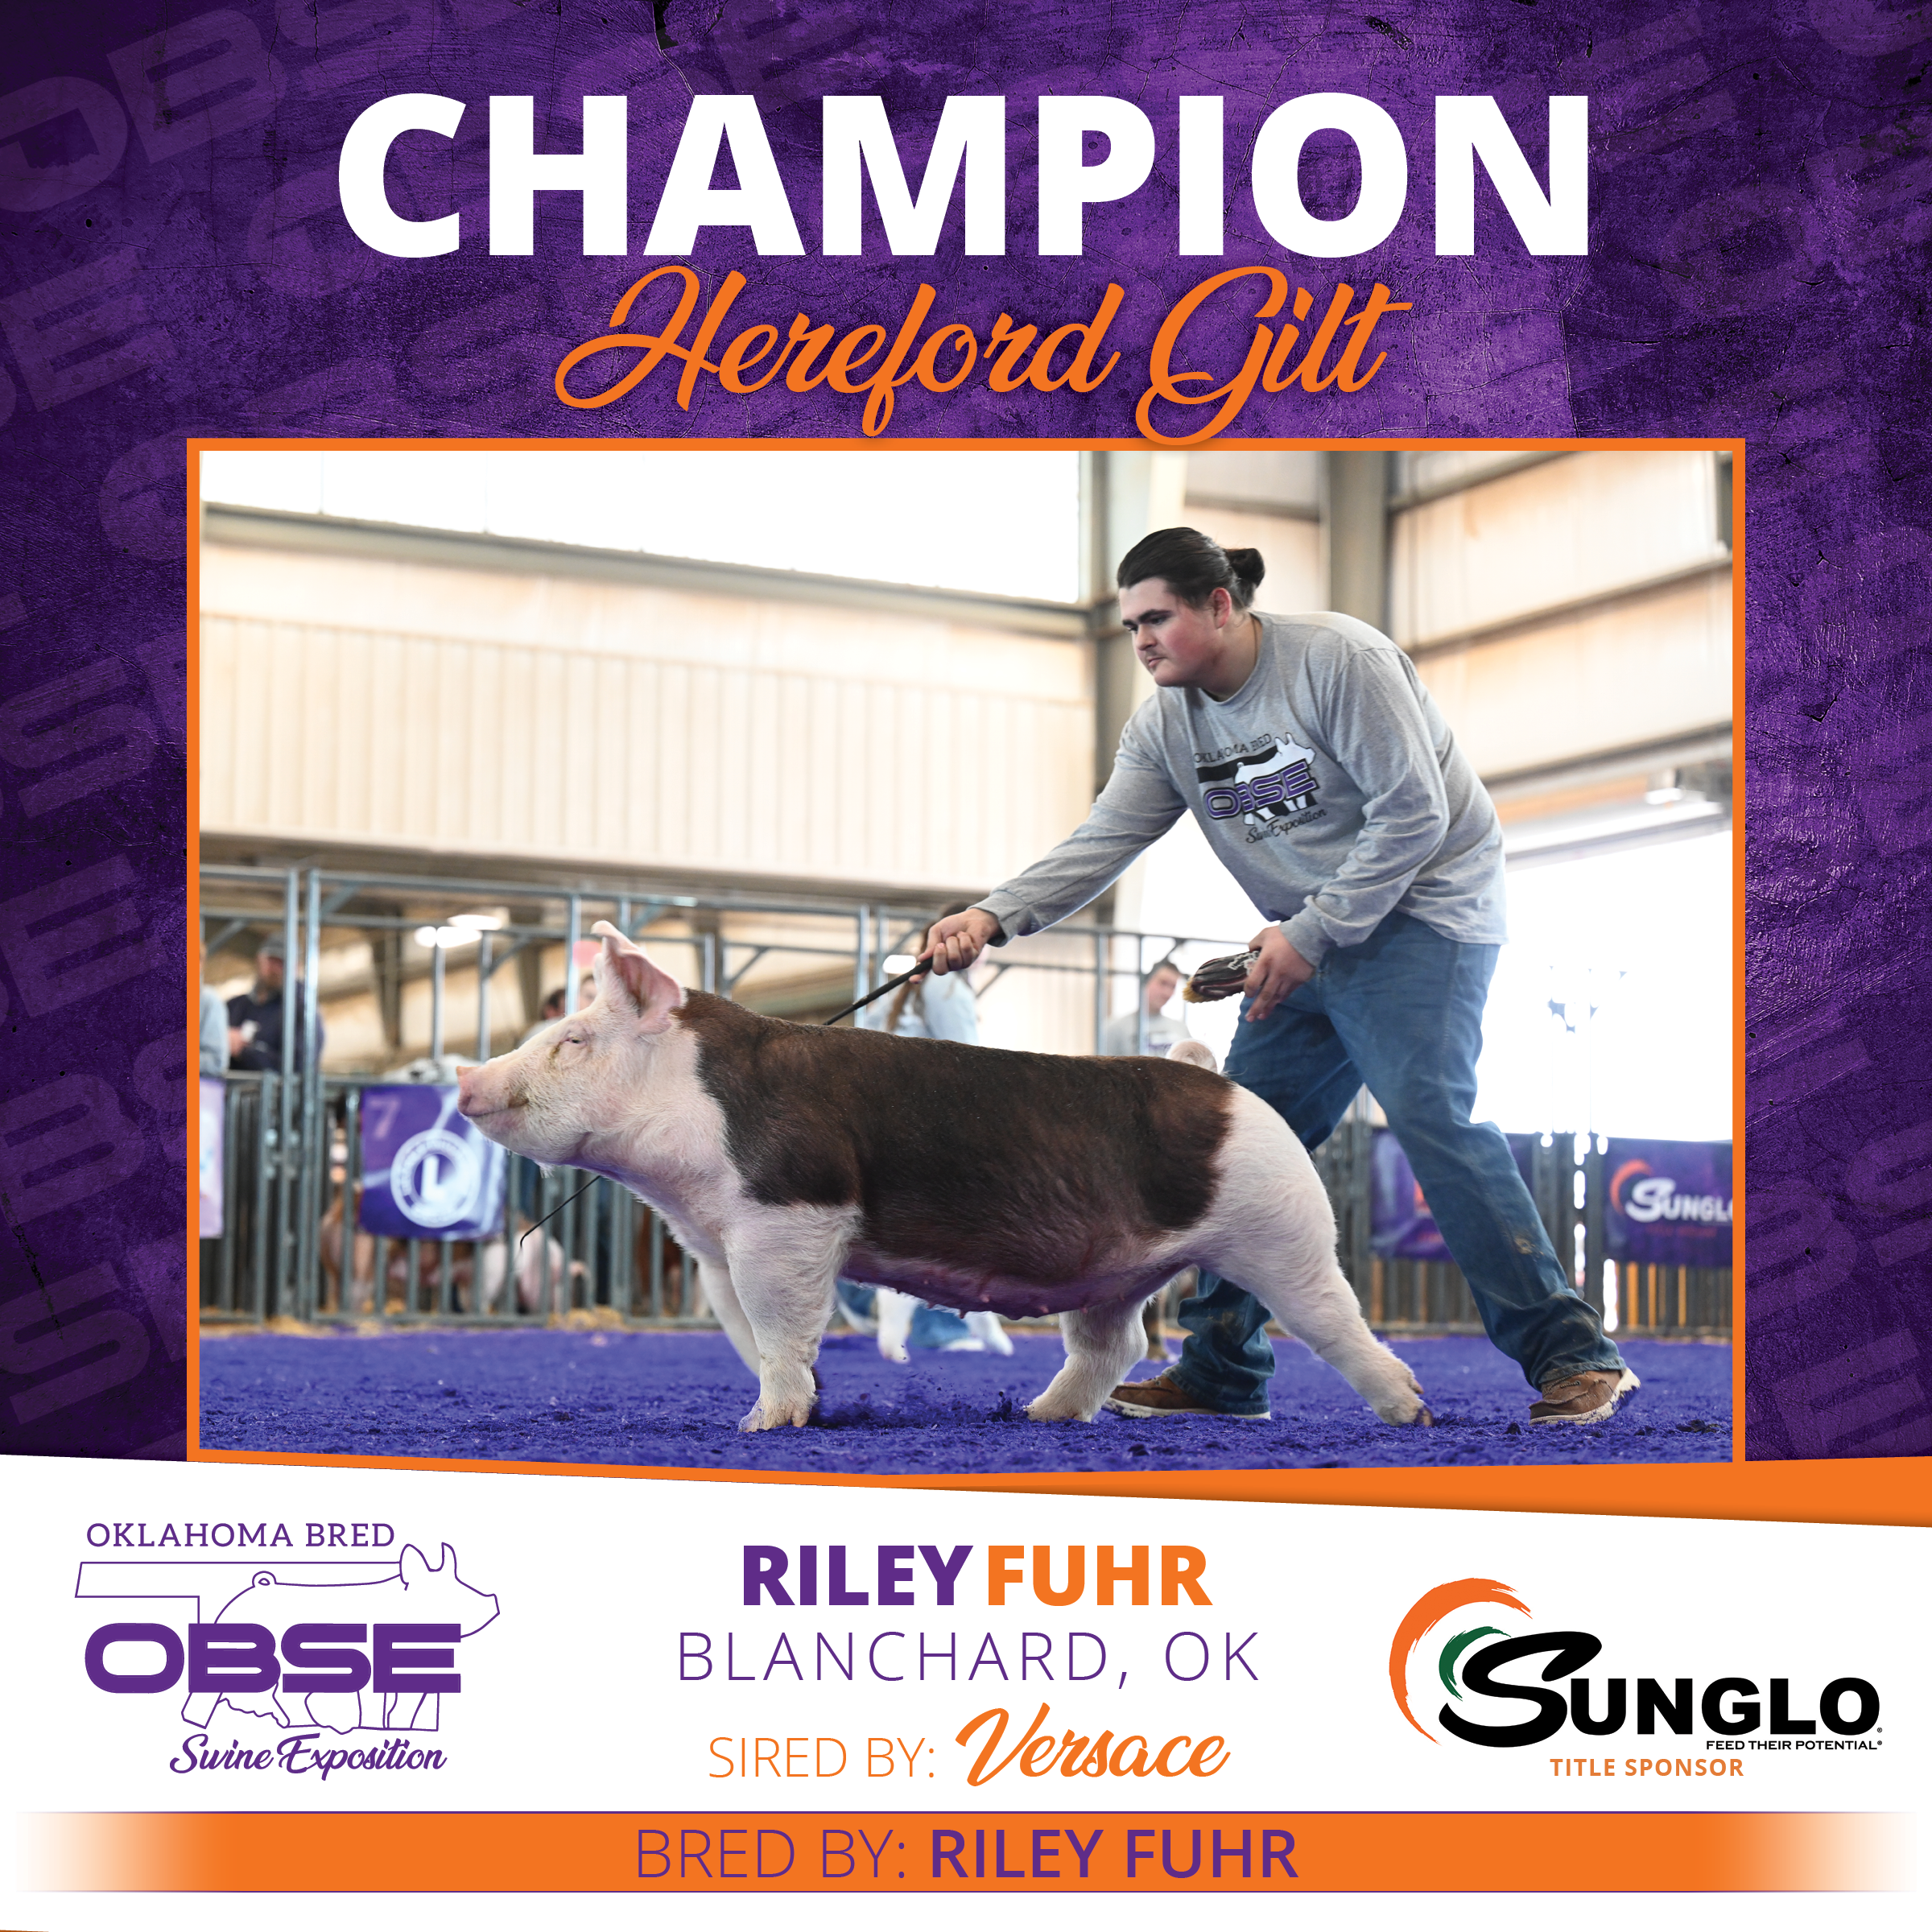 Champion Hereford Gilt (1).png